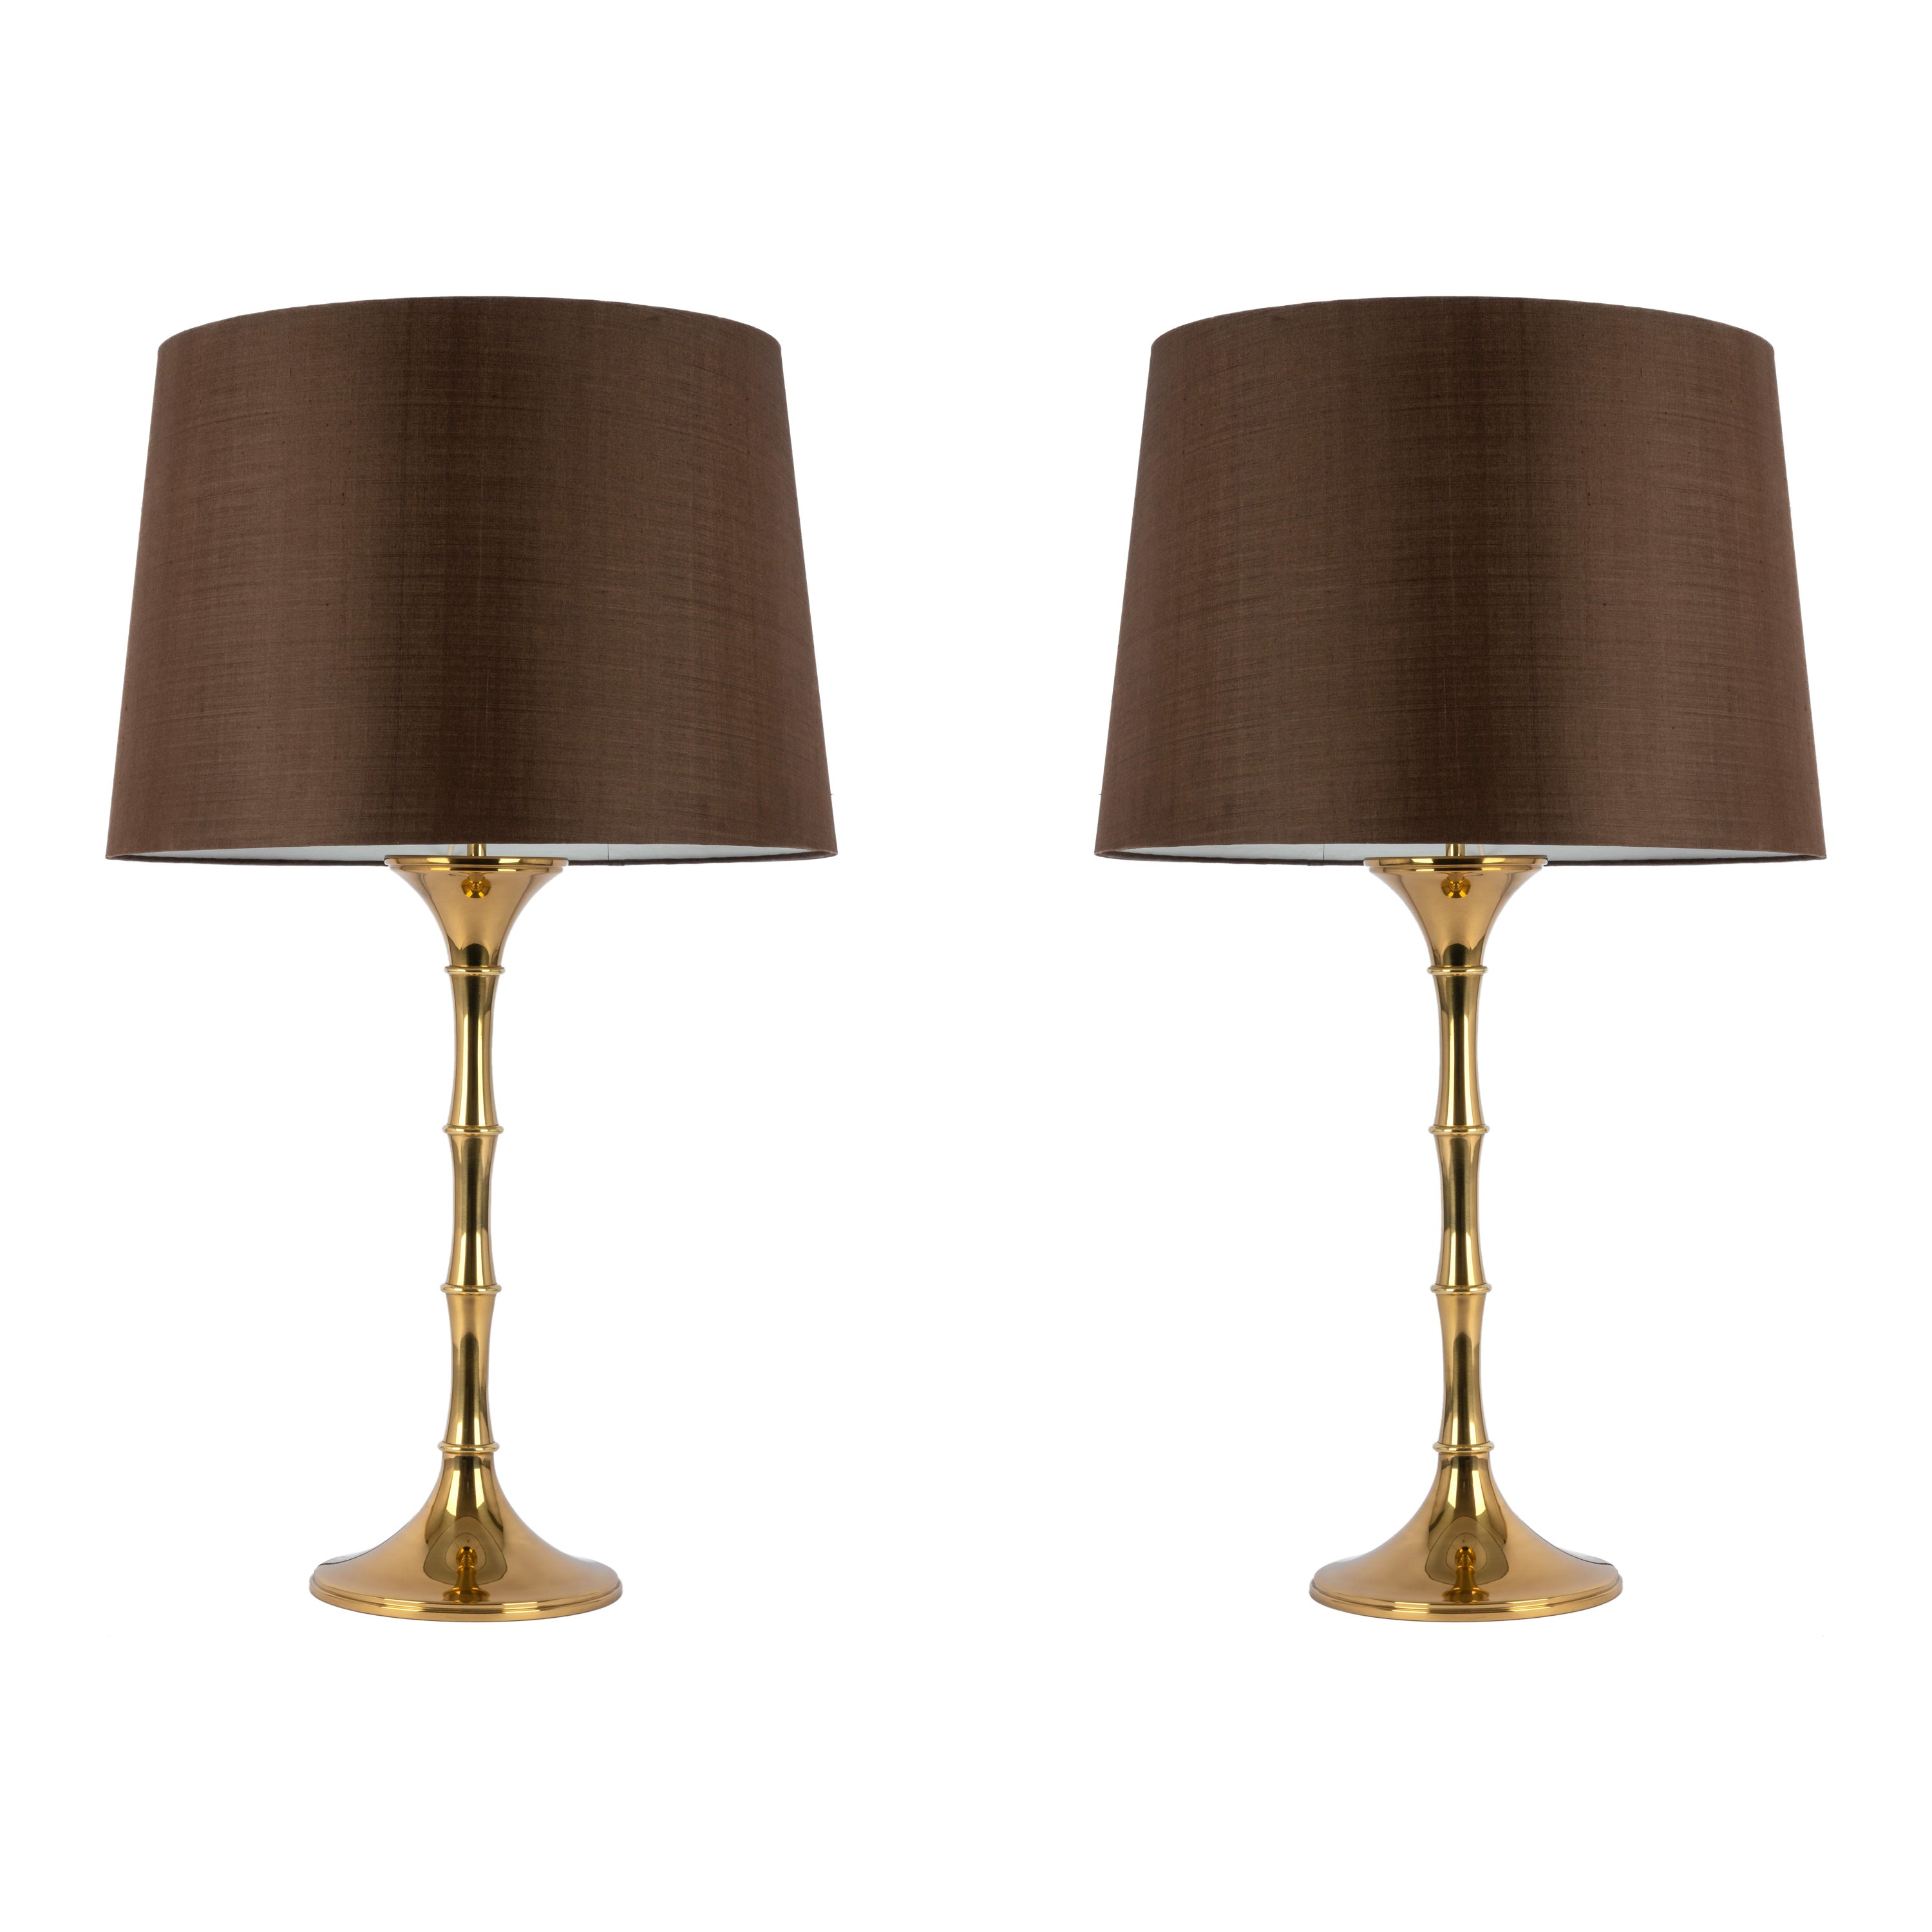 Pair of Bamboo Table Lamps by Ingo Maurer, Germany, 1970s For Sale